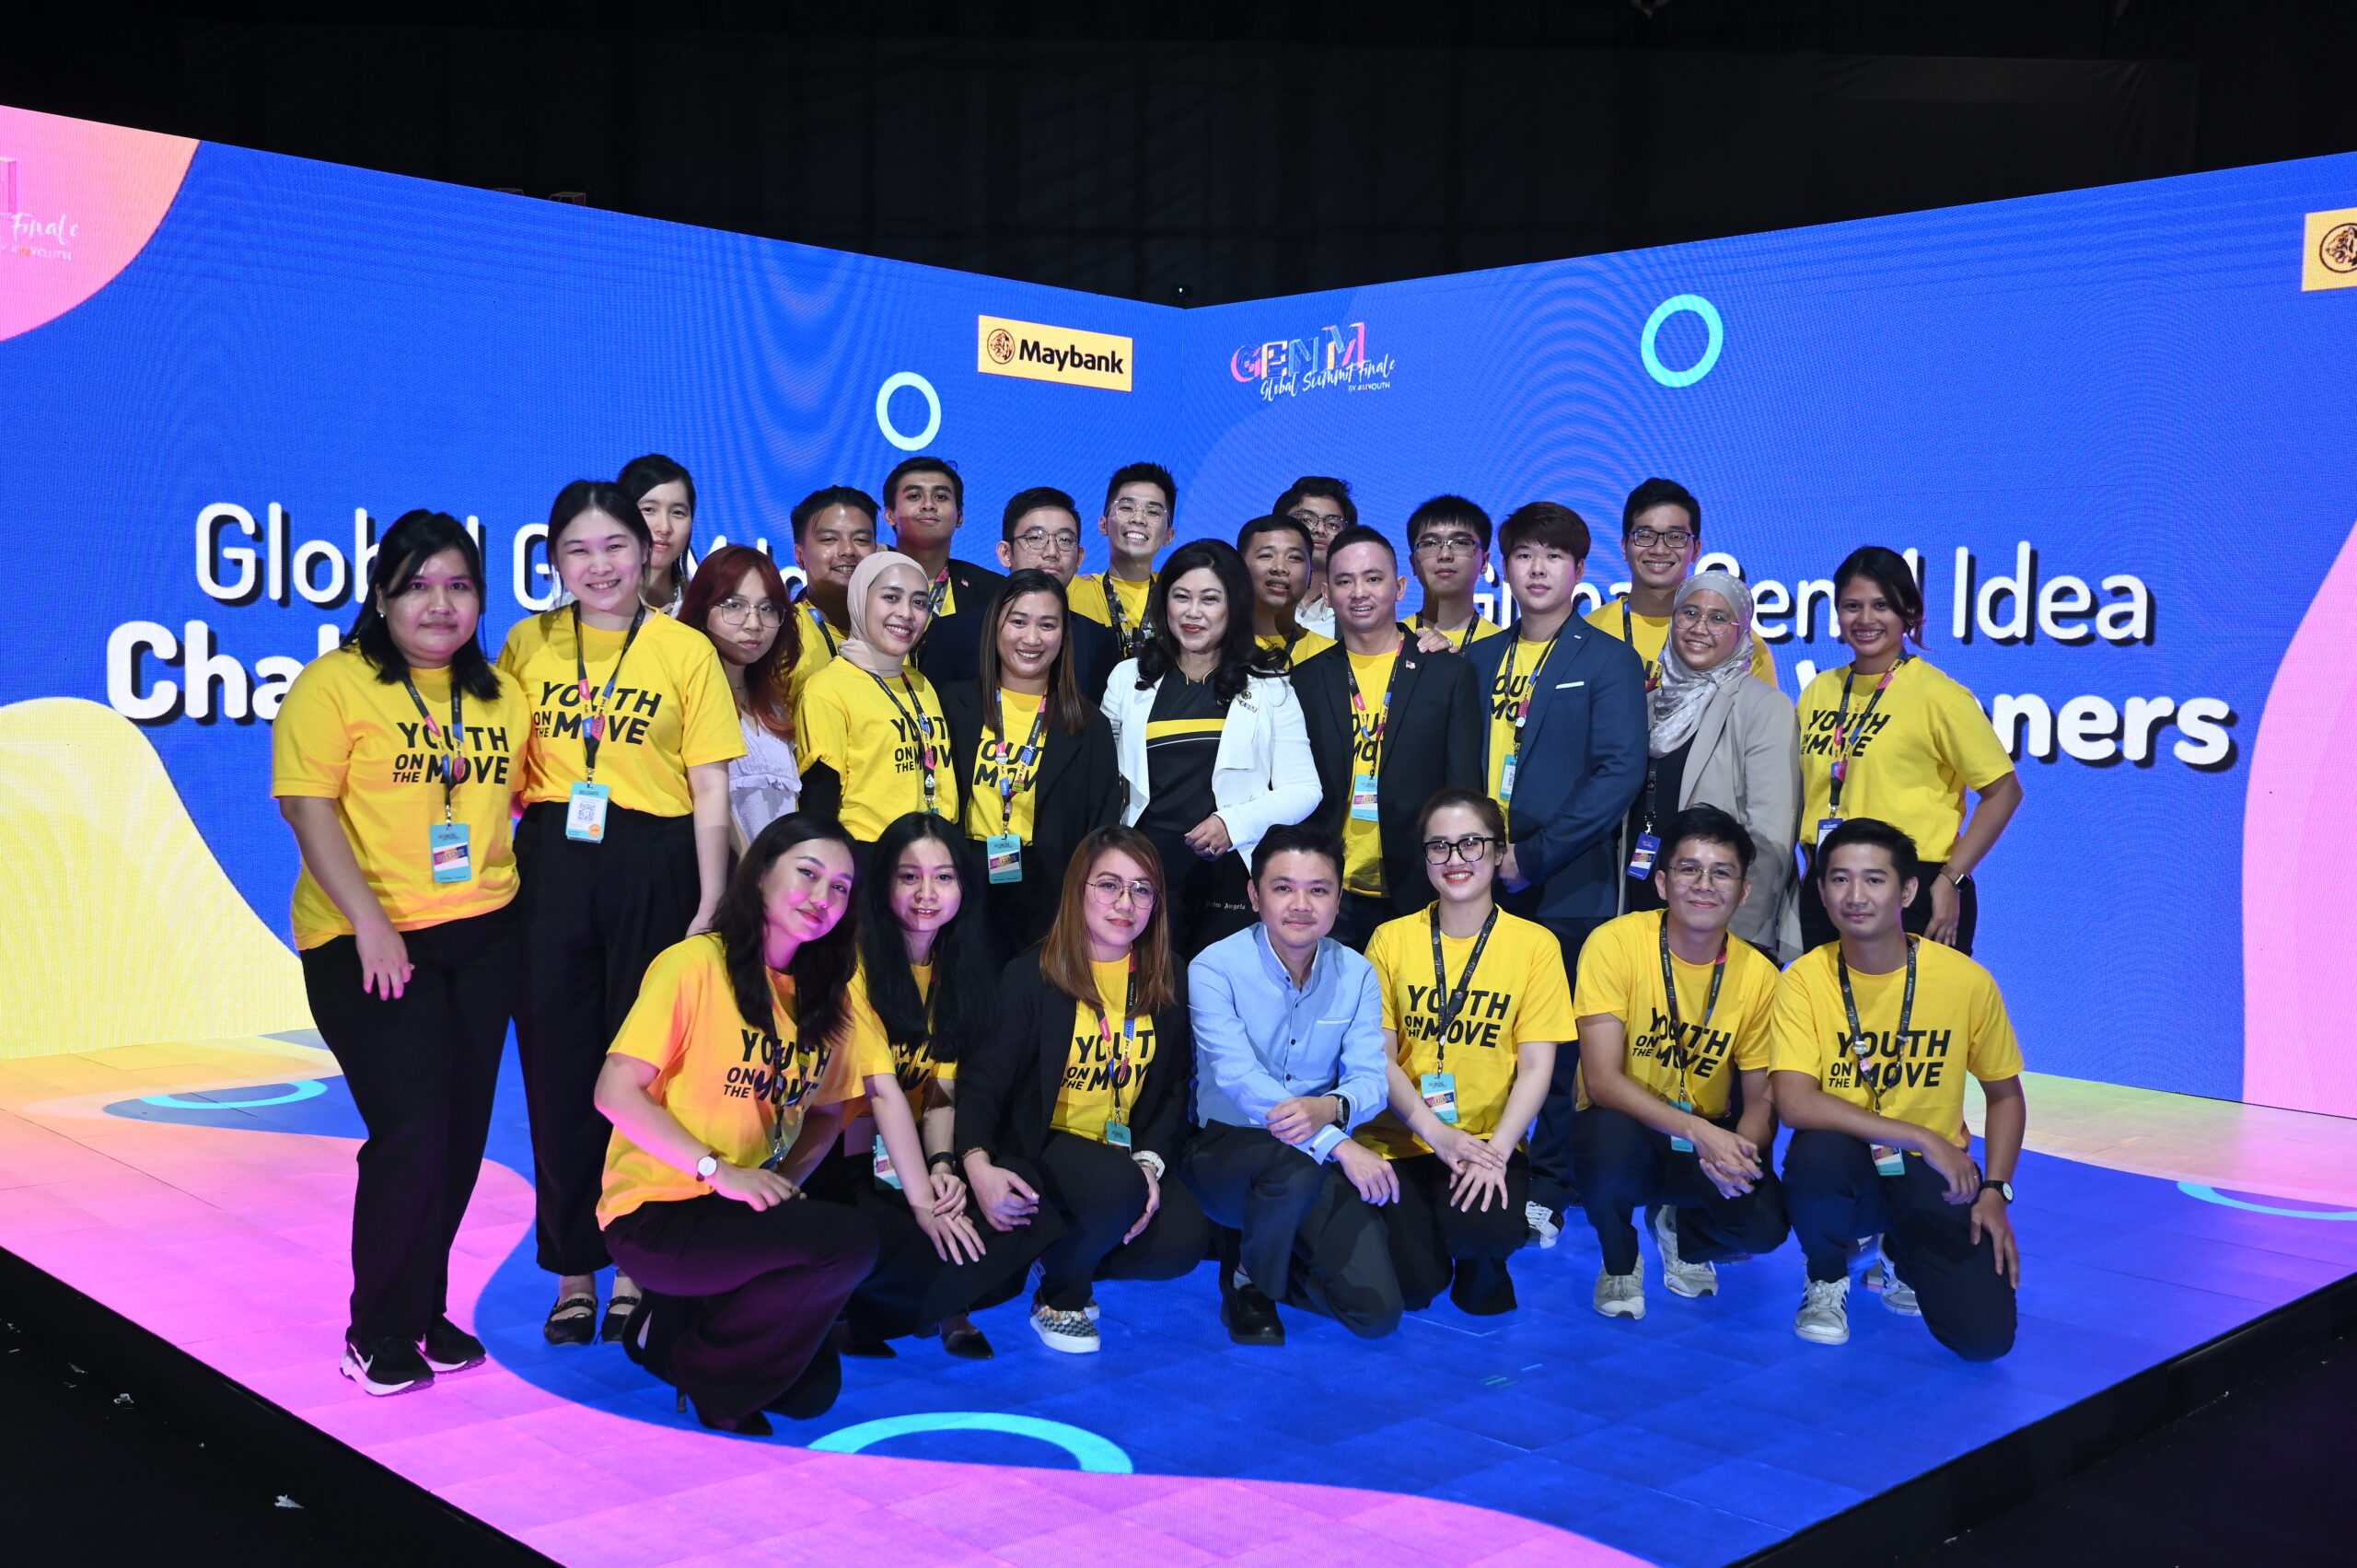 An inspiring conclusion to maybank’s genm global summit 2023 finale | weirdkaya